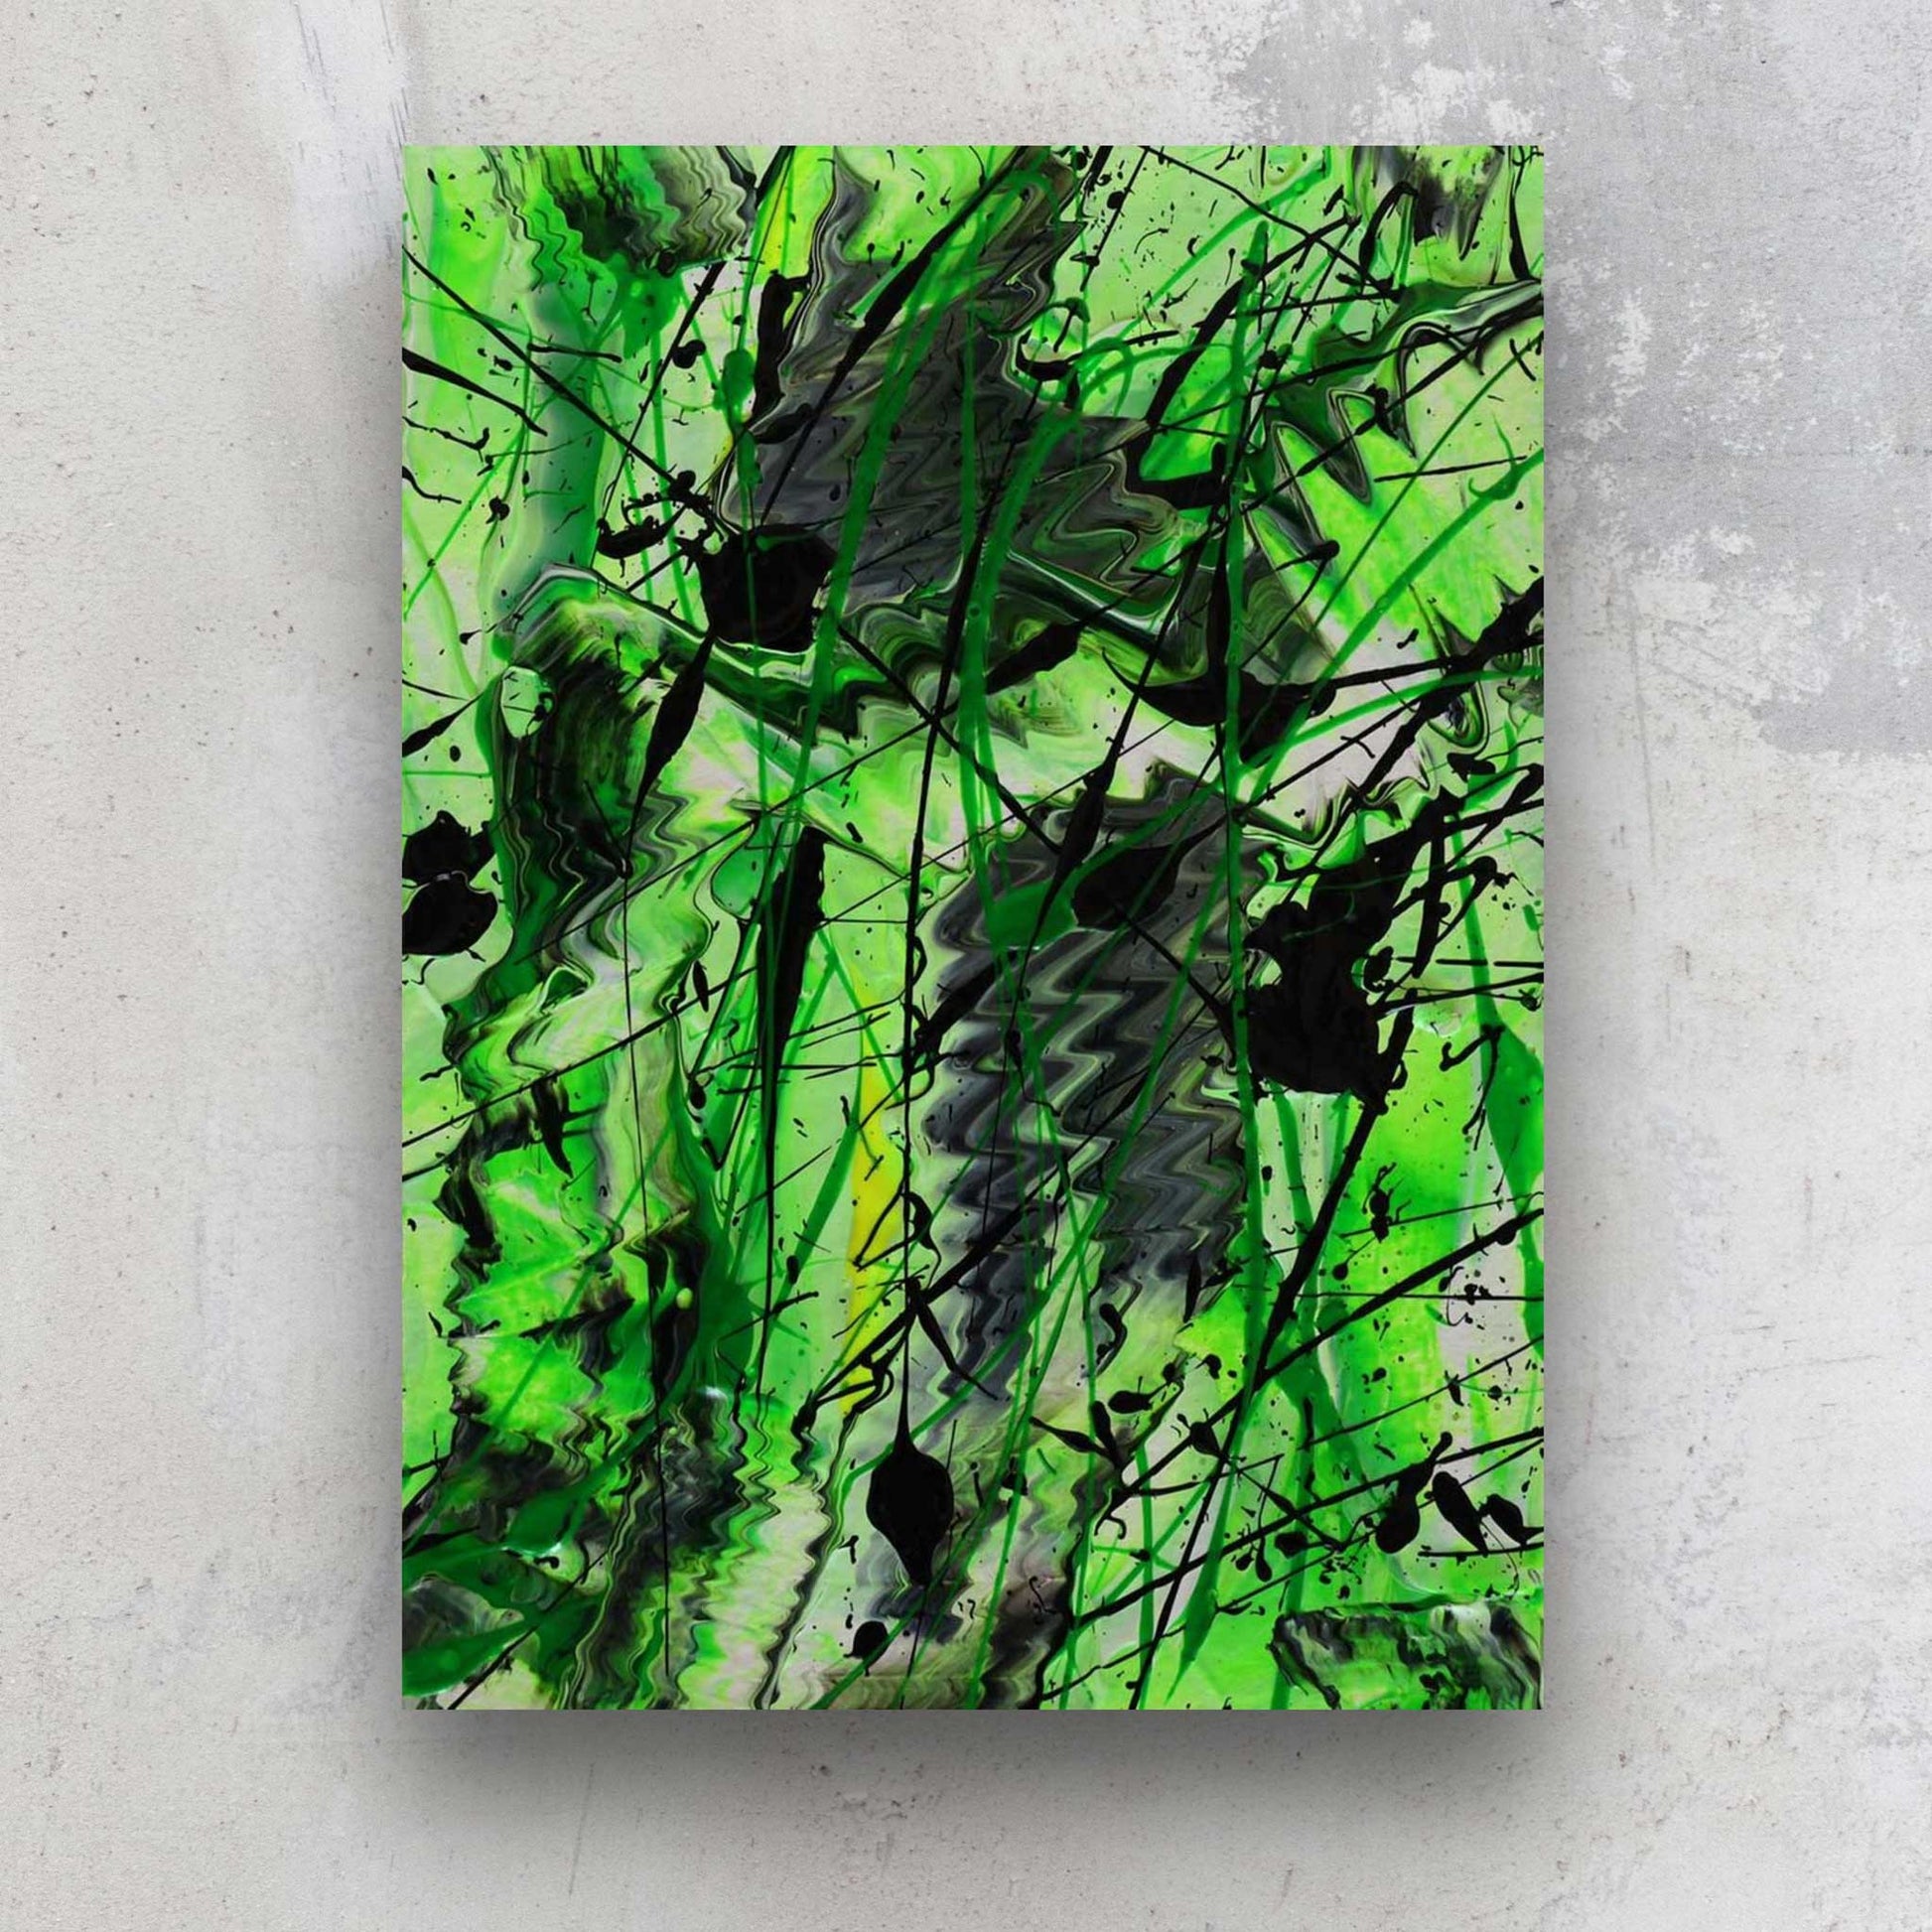 Green ivy, original abstract on paper painted in bright greens, with hints of light grey and dark marks. Painted by Bridget Bradley